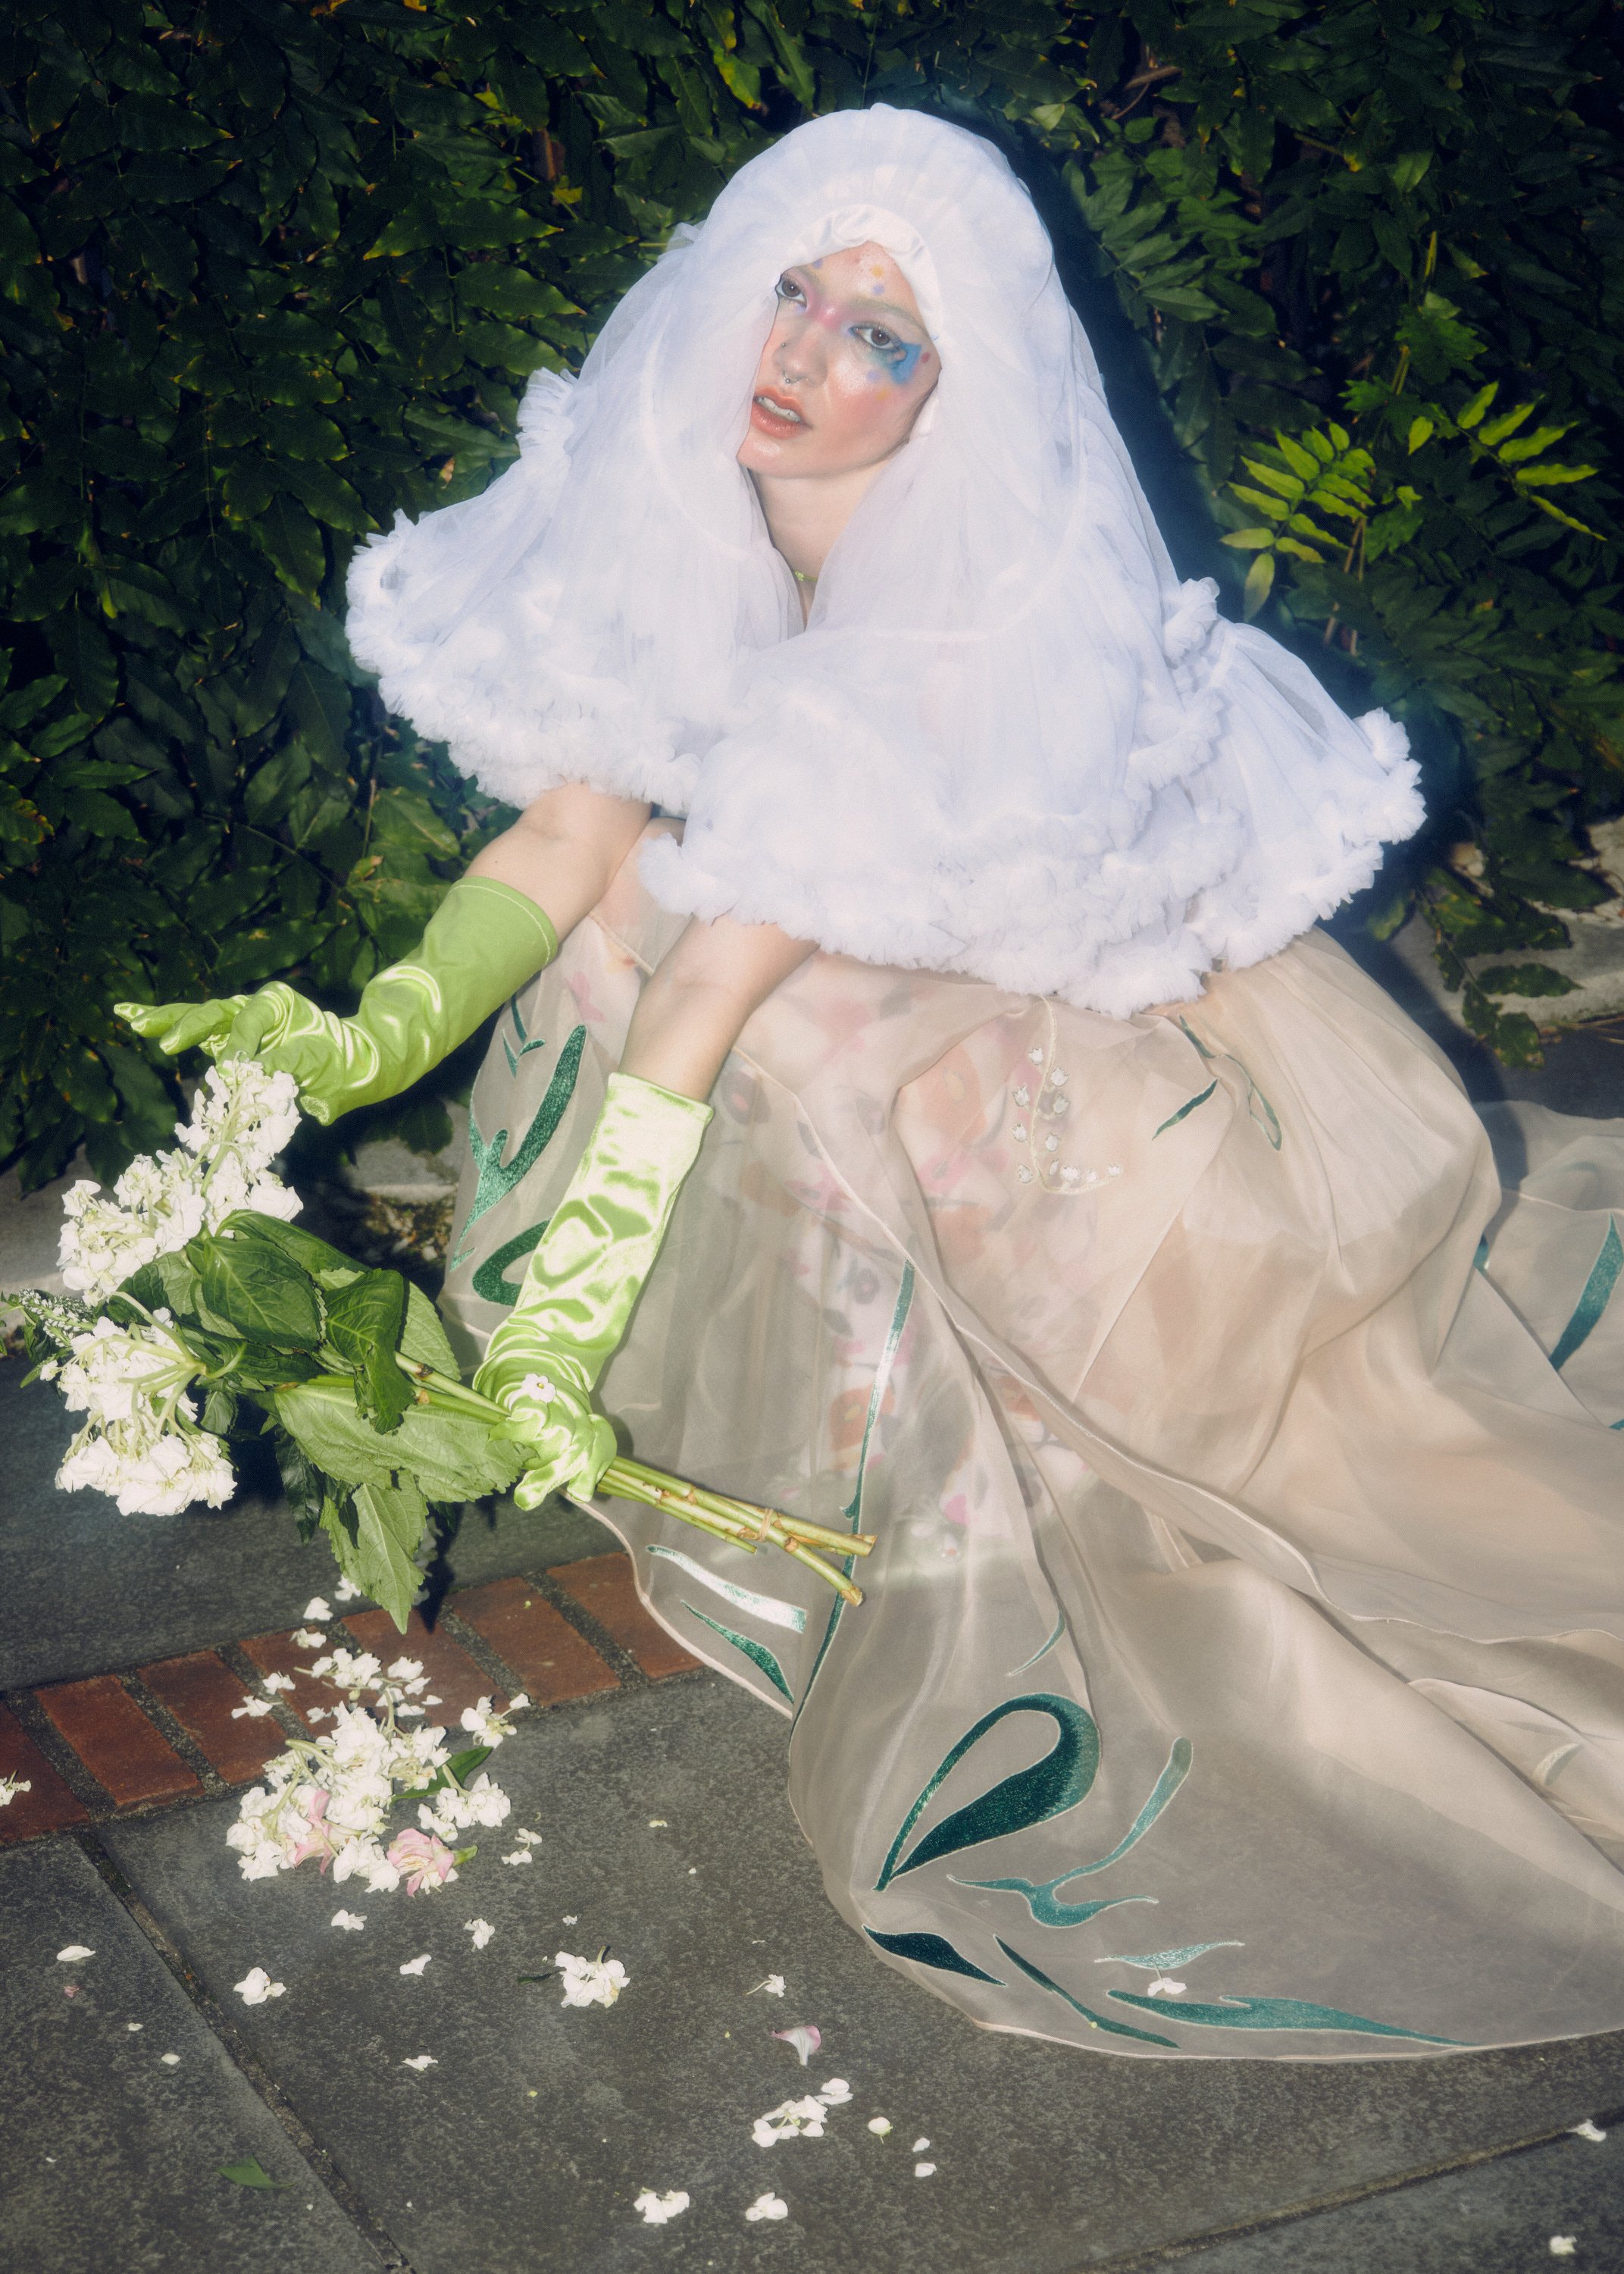   “Dream Butterflies Dress” by Yueling Lu    Website   /   Instagram   , Veil and green gloves by    Cyndi Yiqing Huang    (styled by    Monica Robles    and    Victoria Panzella   )  